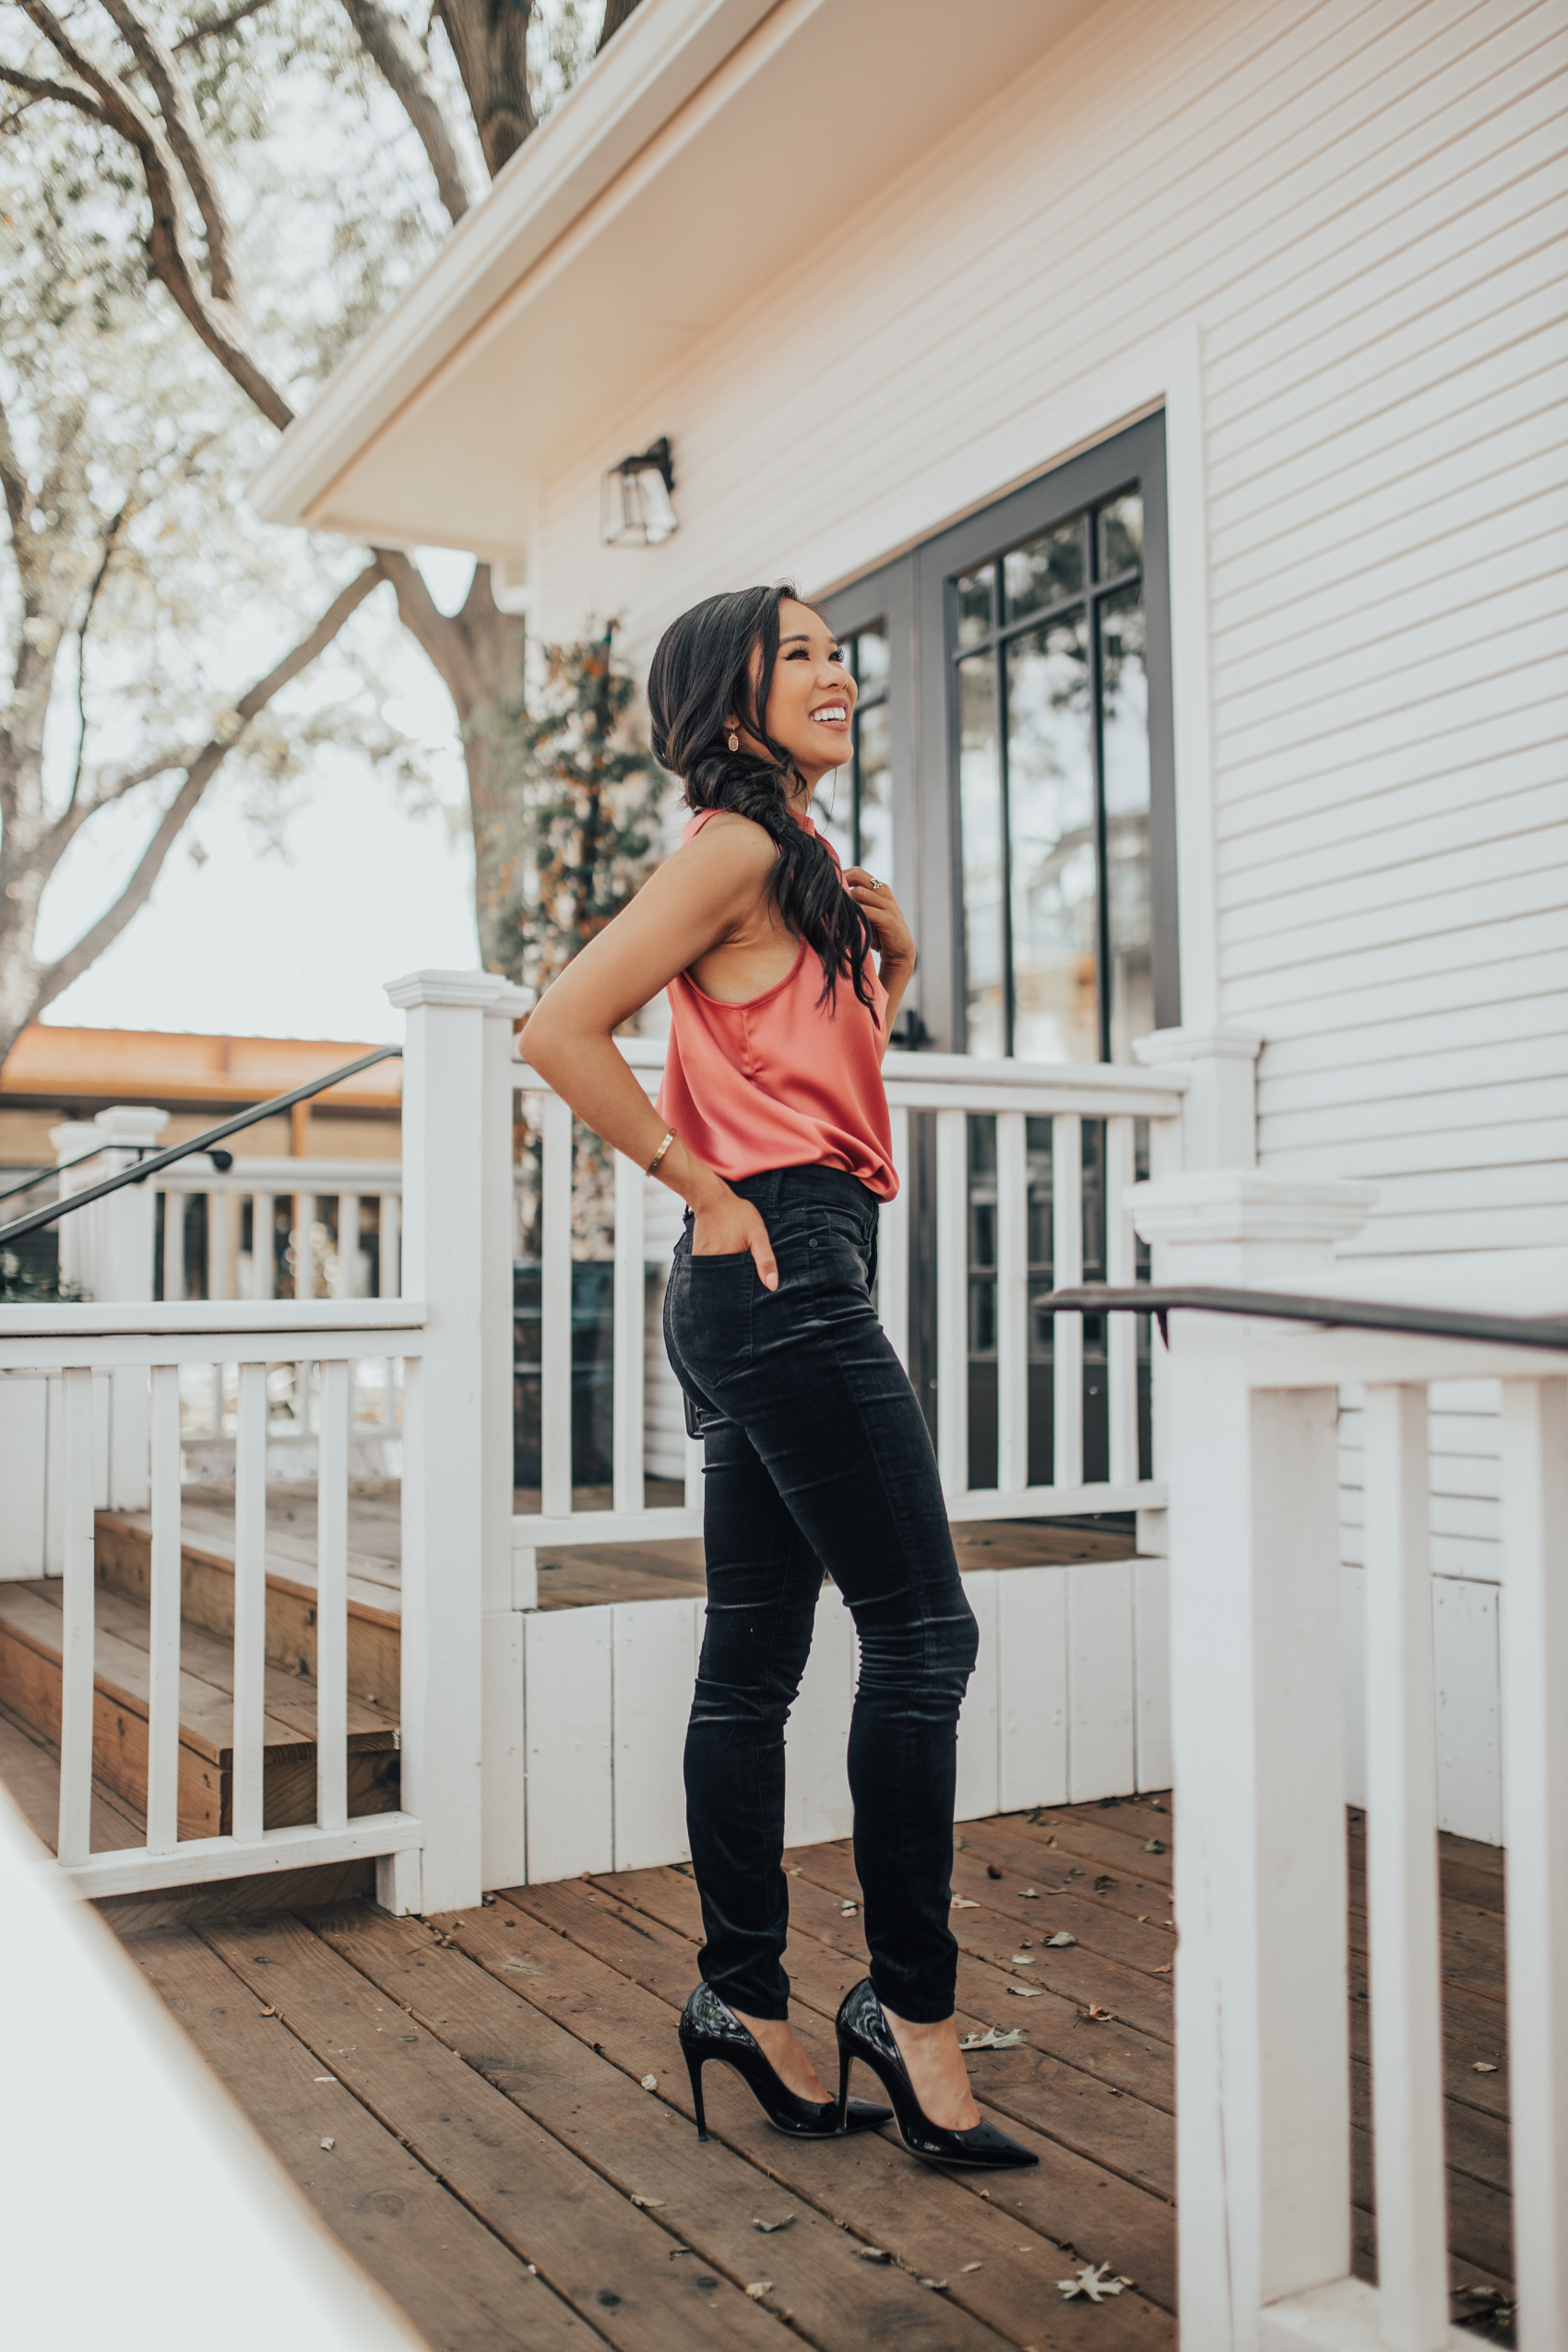 Blogger Hoang-Kim shares a holiday party outfit with velvet jeans and a satin top